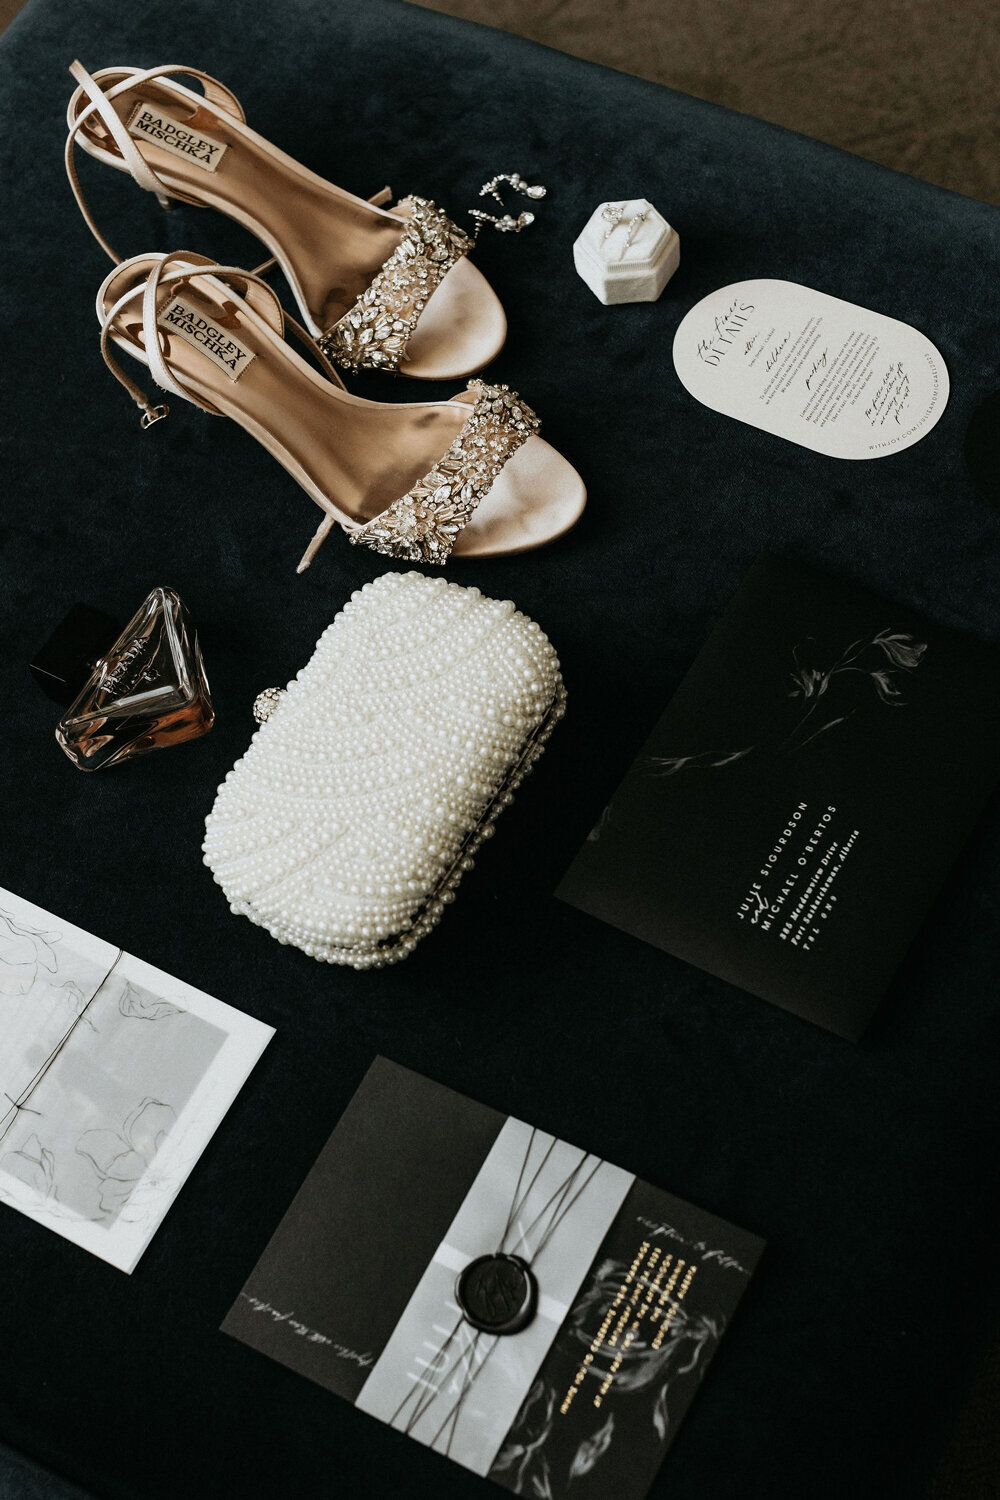 Wedding day bridal accessories including heels, ring, perfume and beaded clutch.